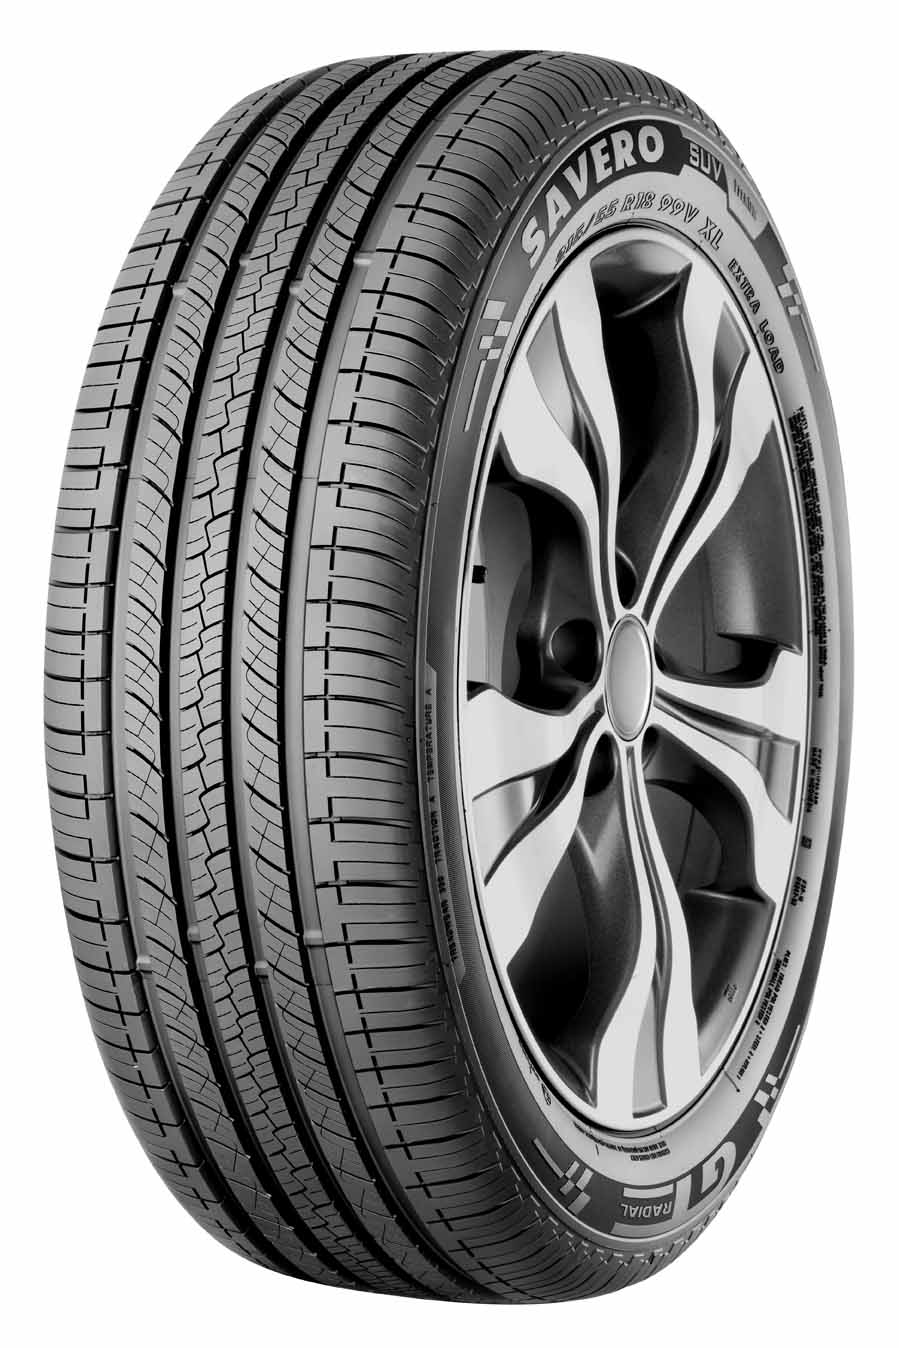 latest-gt-radial-tires-for-suvs-4-4-magazine